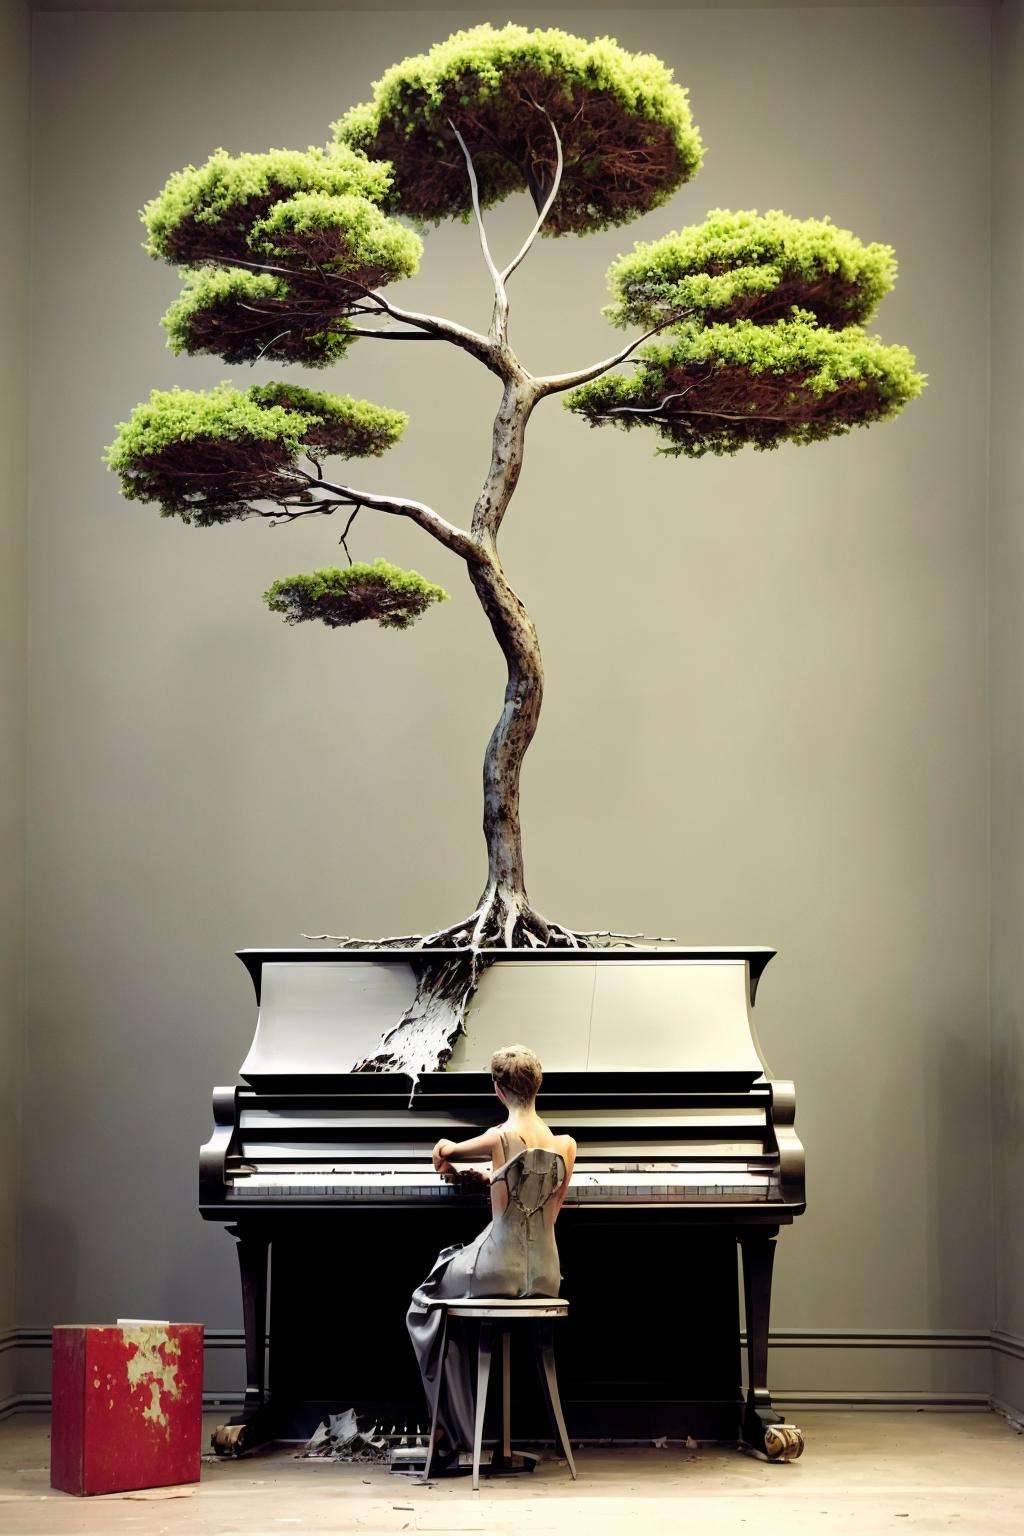 Sculpture: A steel tree growing from a cracked piano, symbolizing the endurance of art in the face of adversity. ,  con_art2